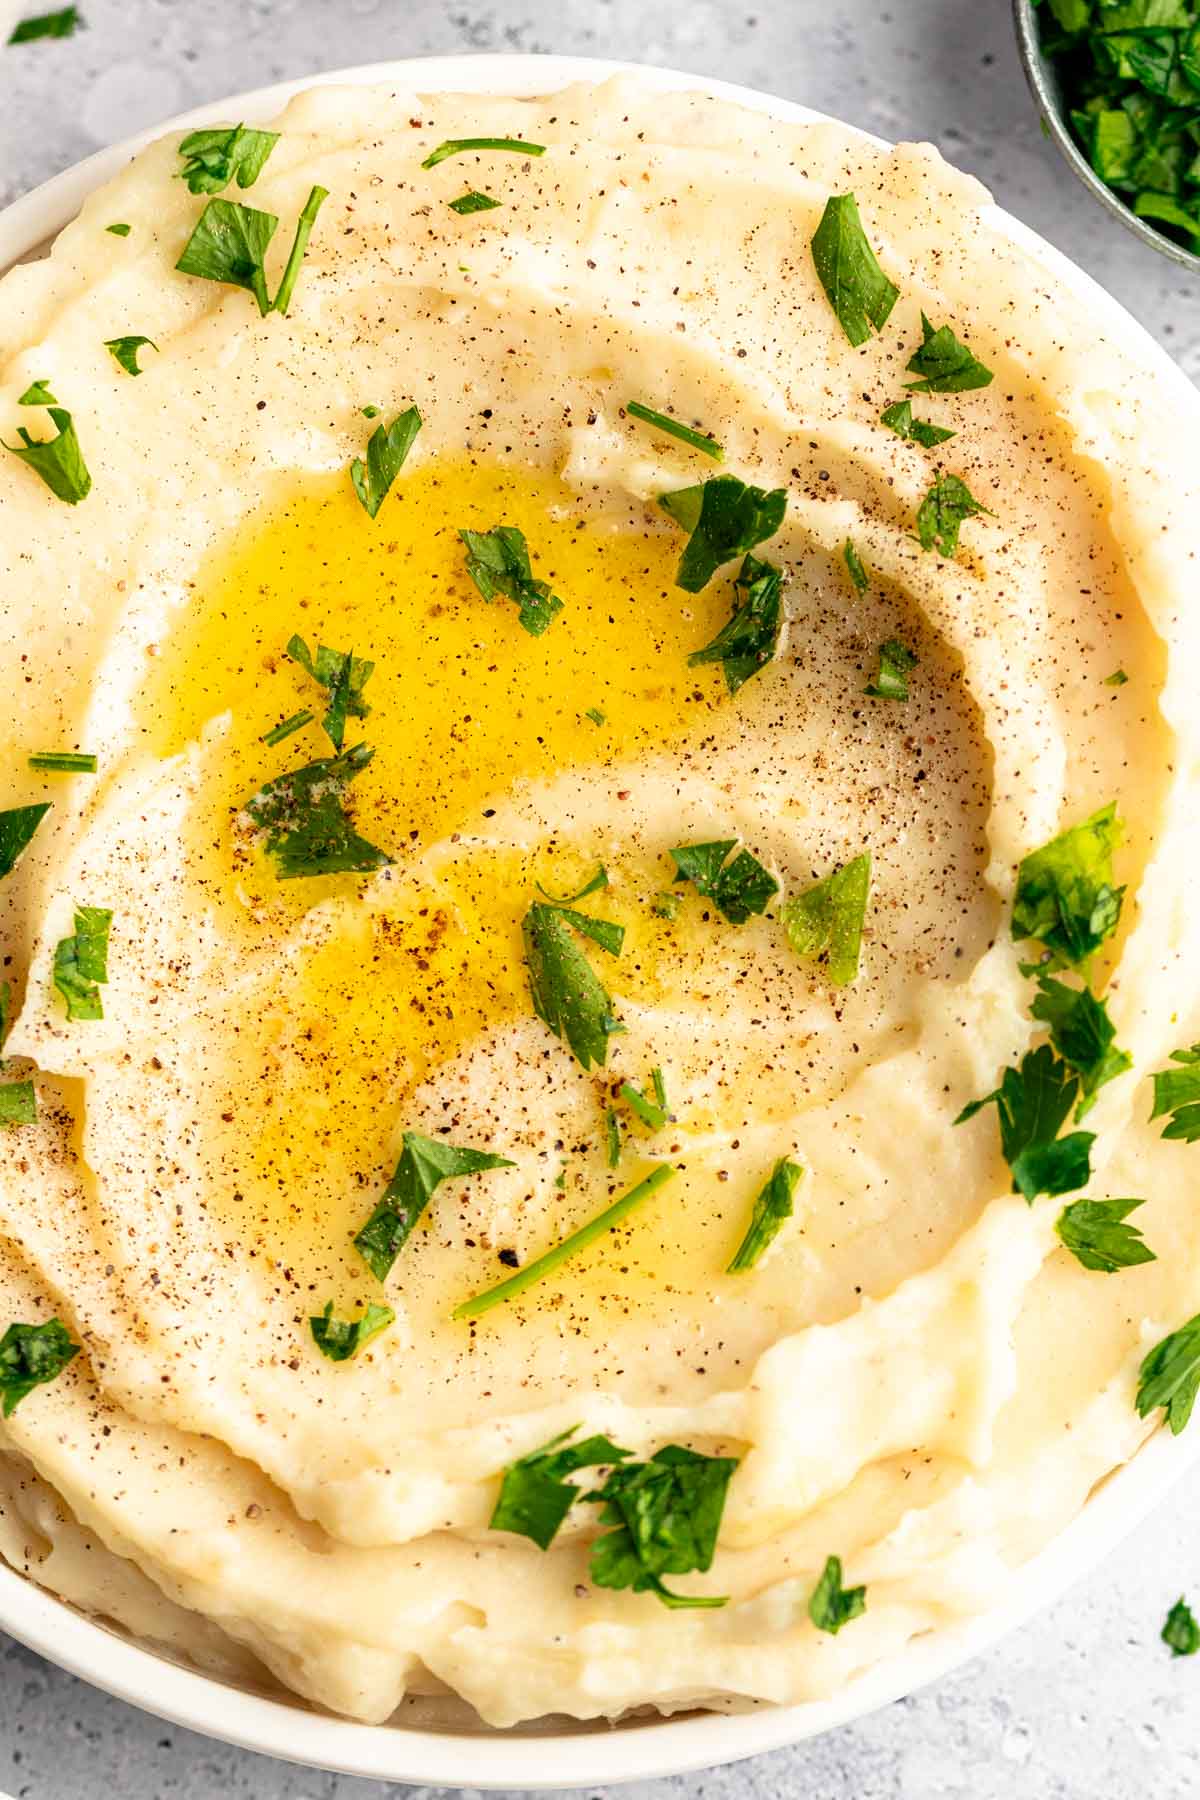 Top of dairy free mashed potatoes.